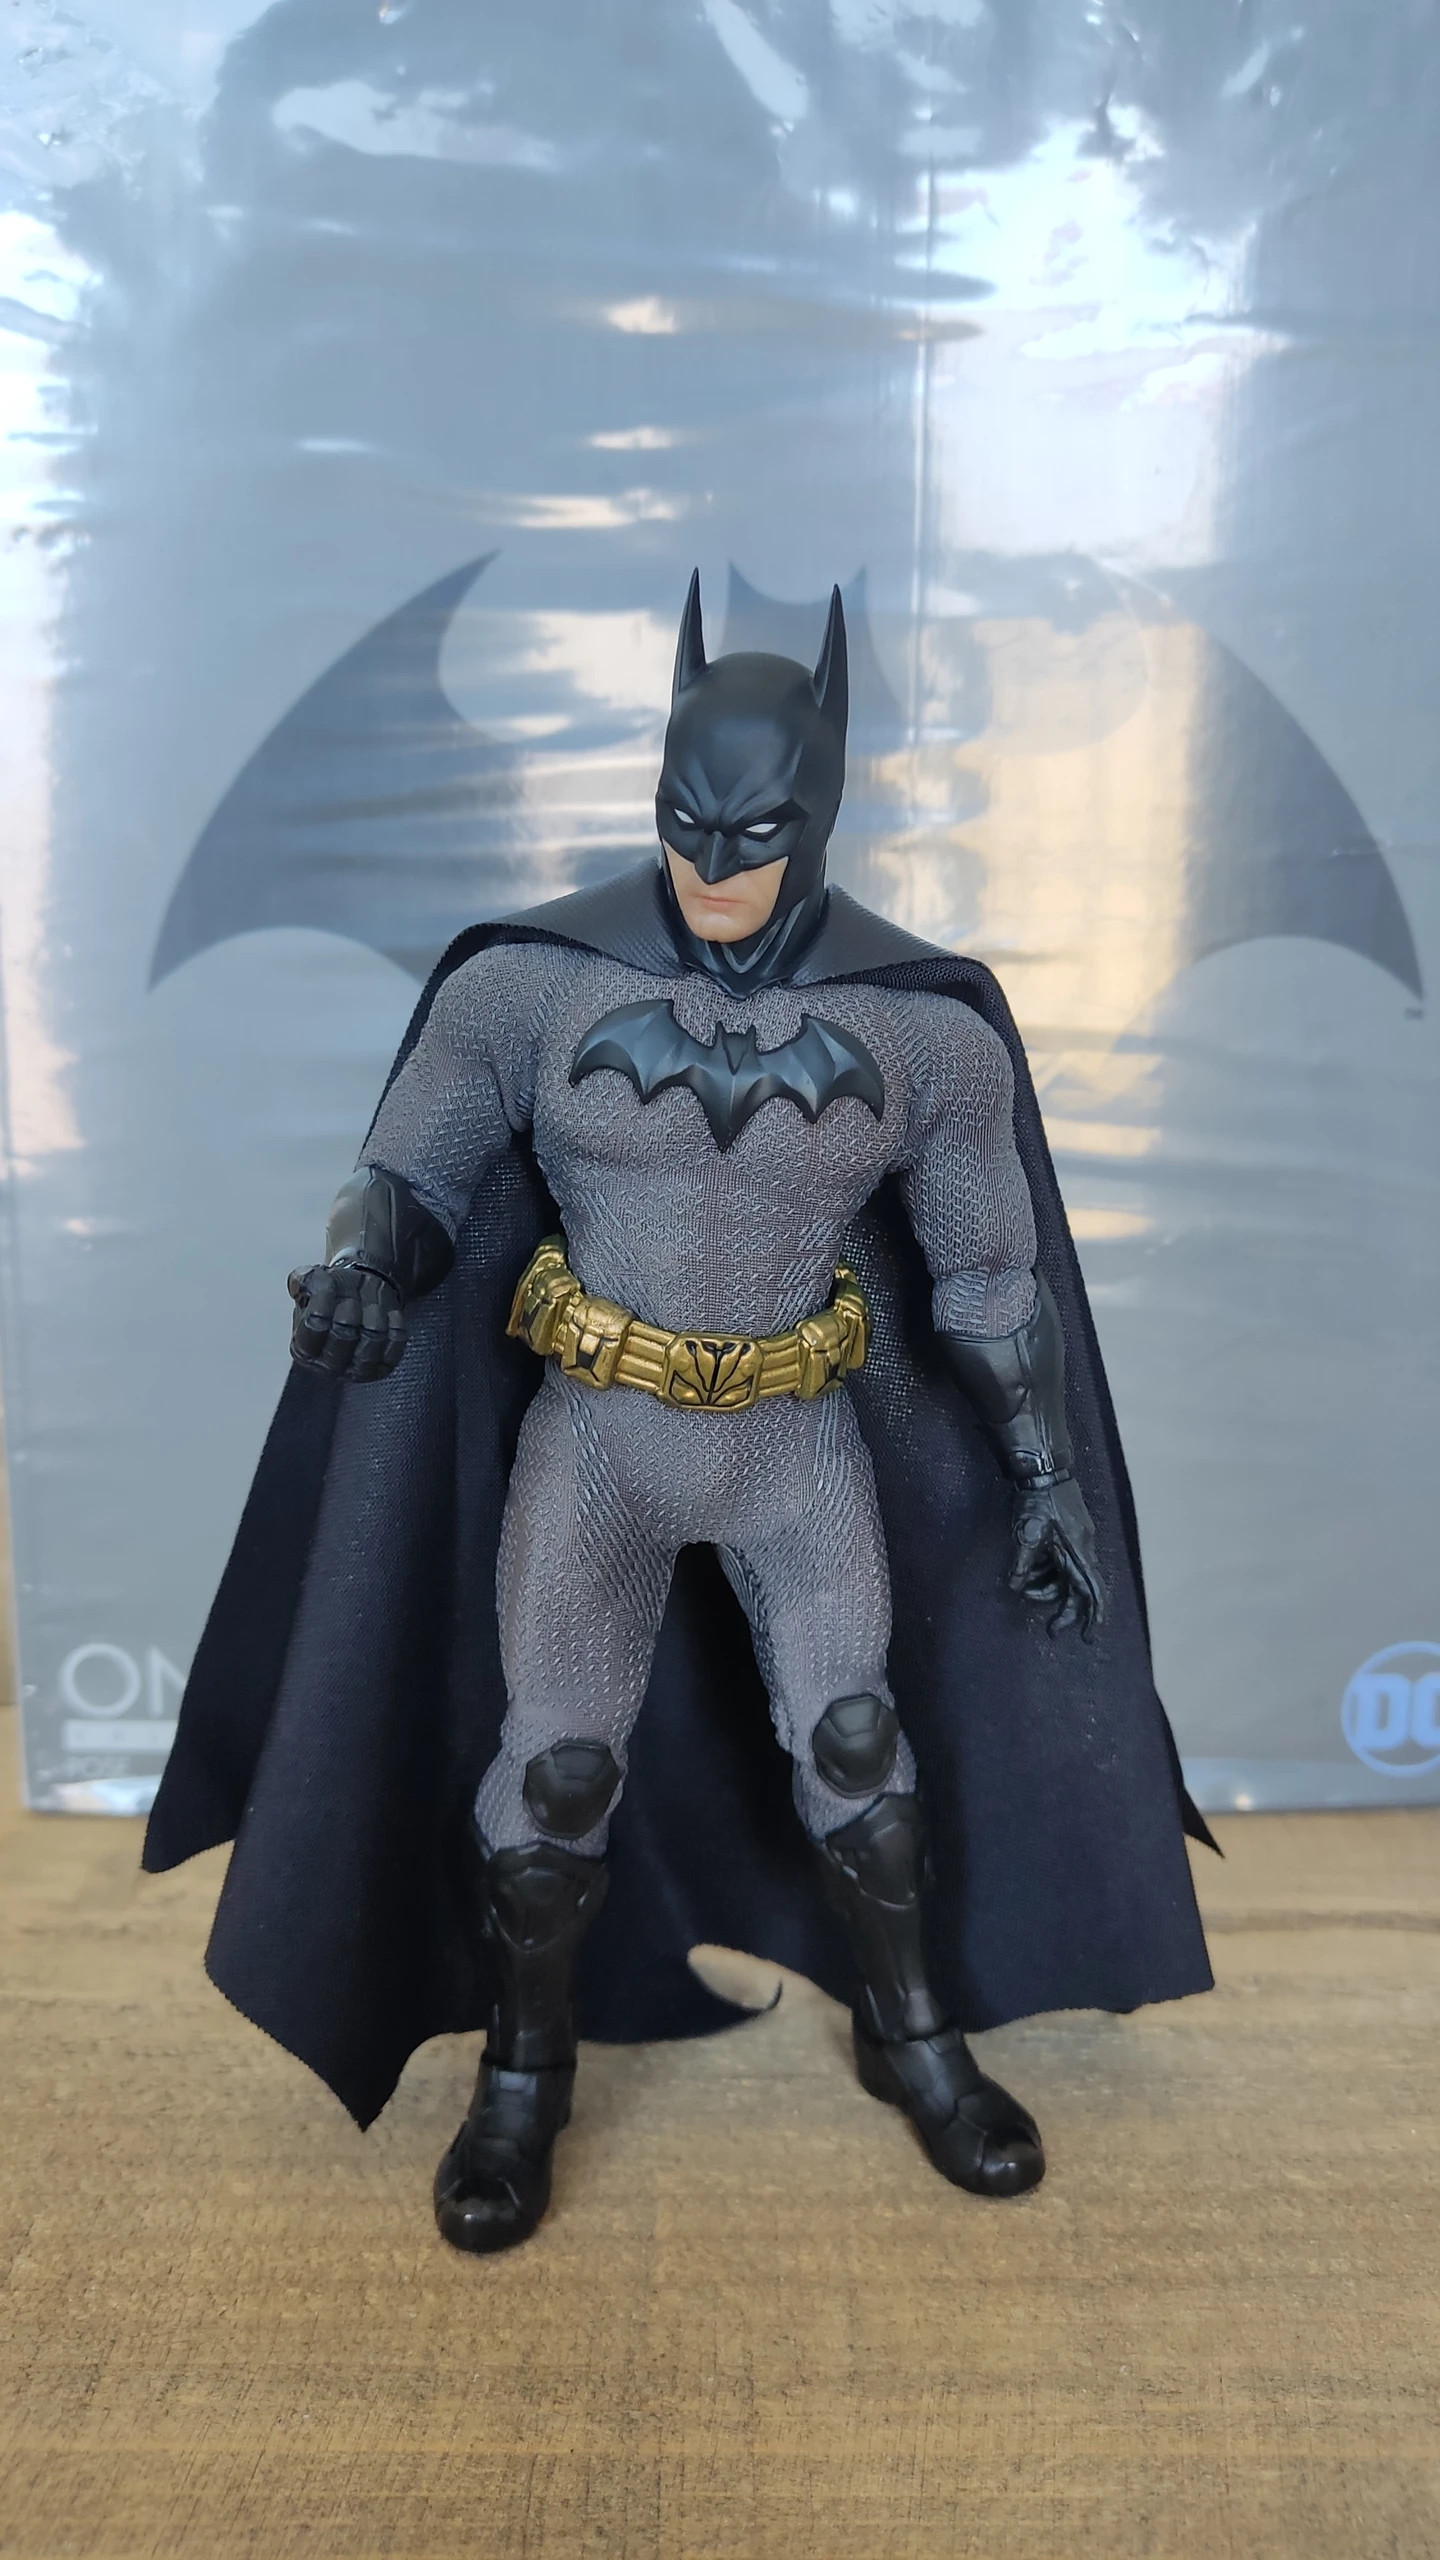 Mezco One:12 Collective Sovereign Knight Grey PX Body Suit 1:12